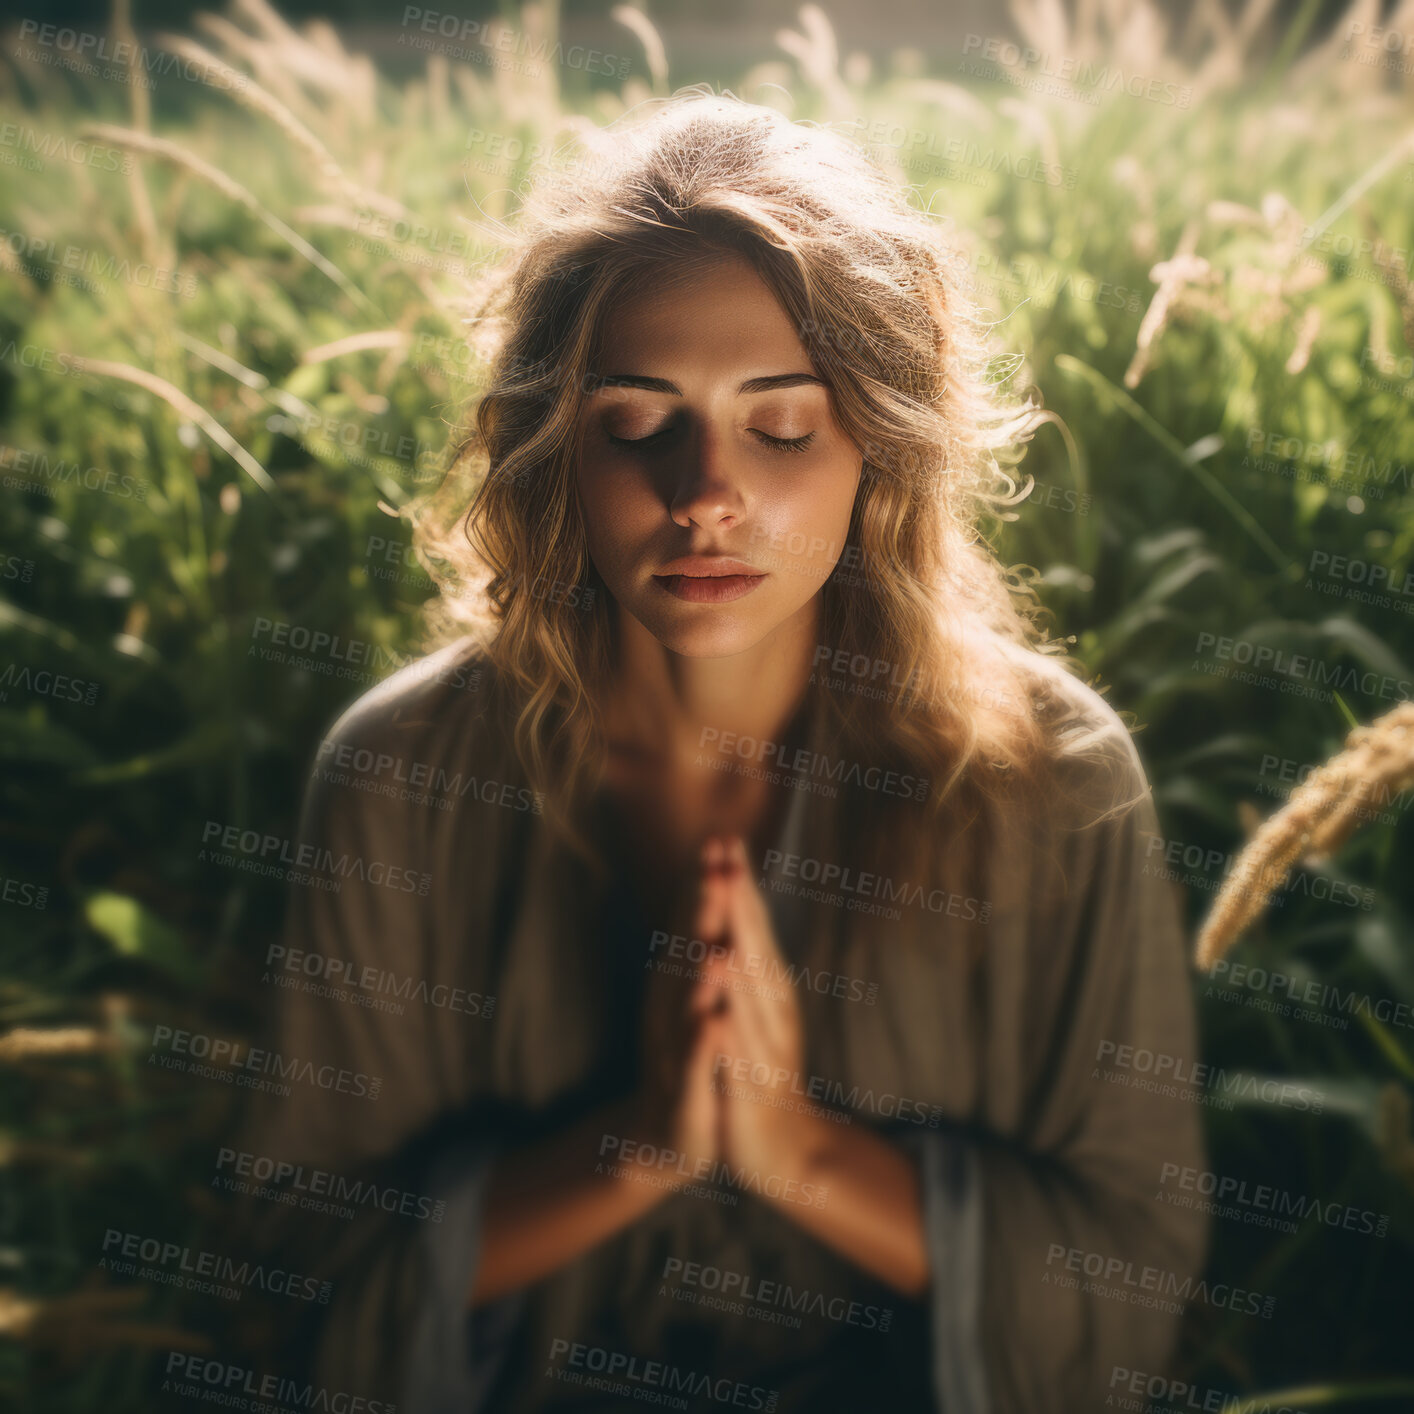 Buy stock photo A woman prays against the backdrop of tall grass. Sunset, peaceful, nature. Religion concept.